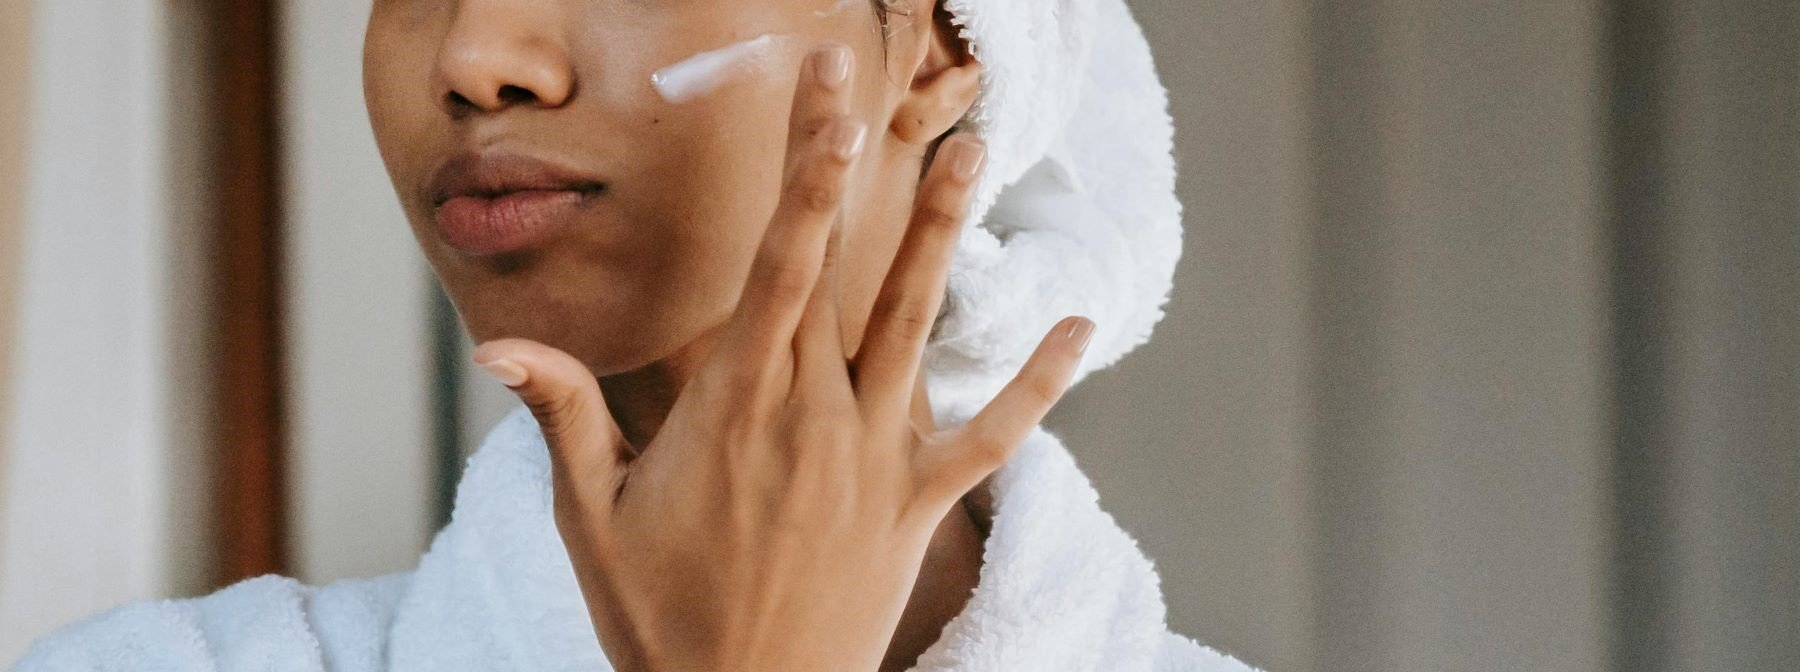 Maximum Skin-Barrier Benefits With a Minimalist Skin Care Approach